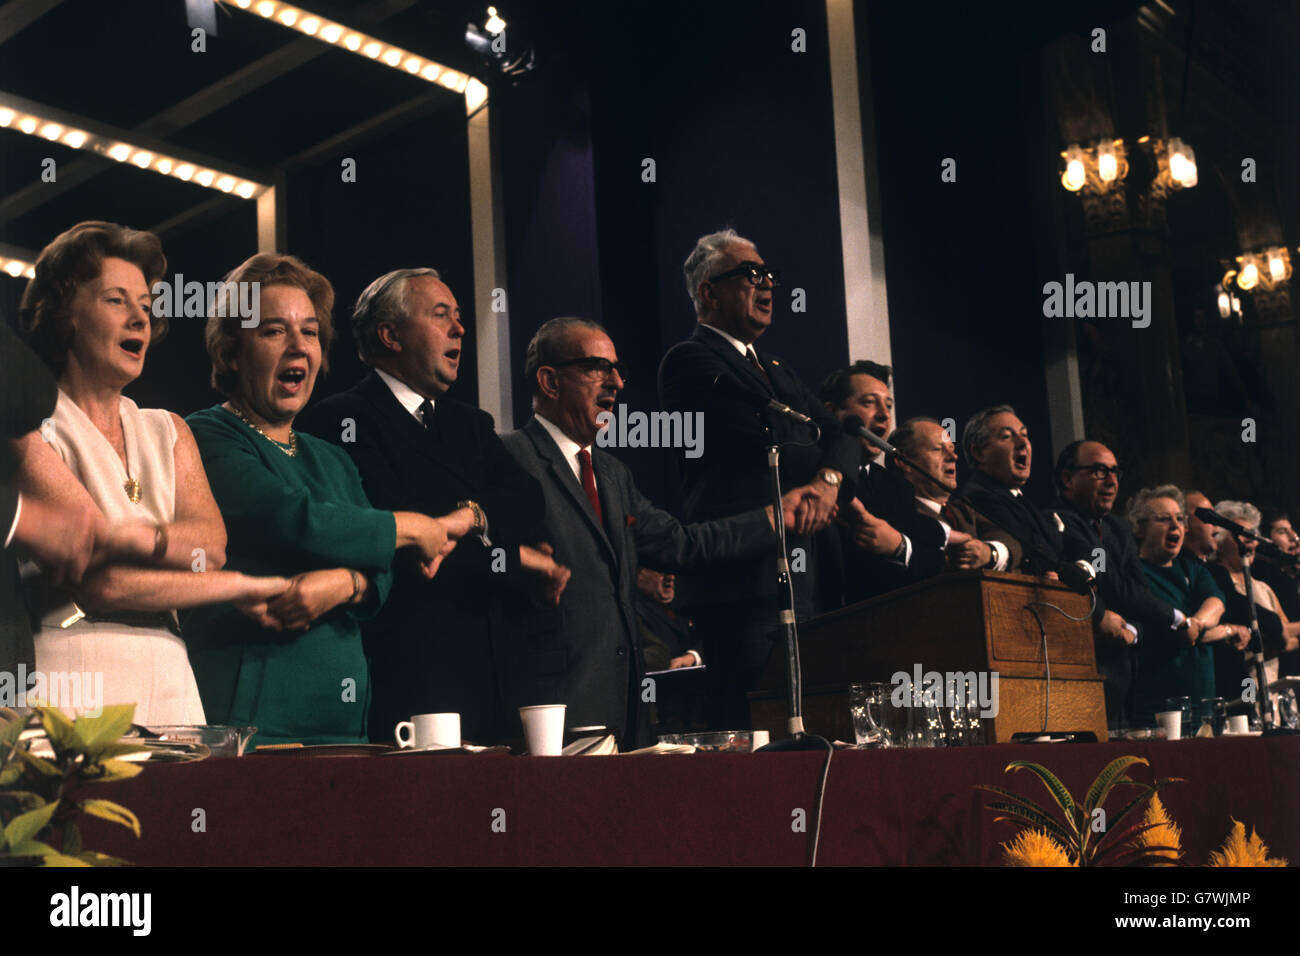 The closing of the Labour Party Conference in Blackpool. (l-r) Barbara Castle, Alice Bacon, Premier Harold Wilson, Harry Nicholas and Ian Mikardo. Stock Photo